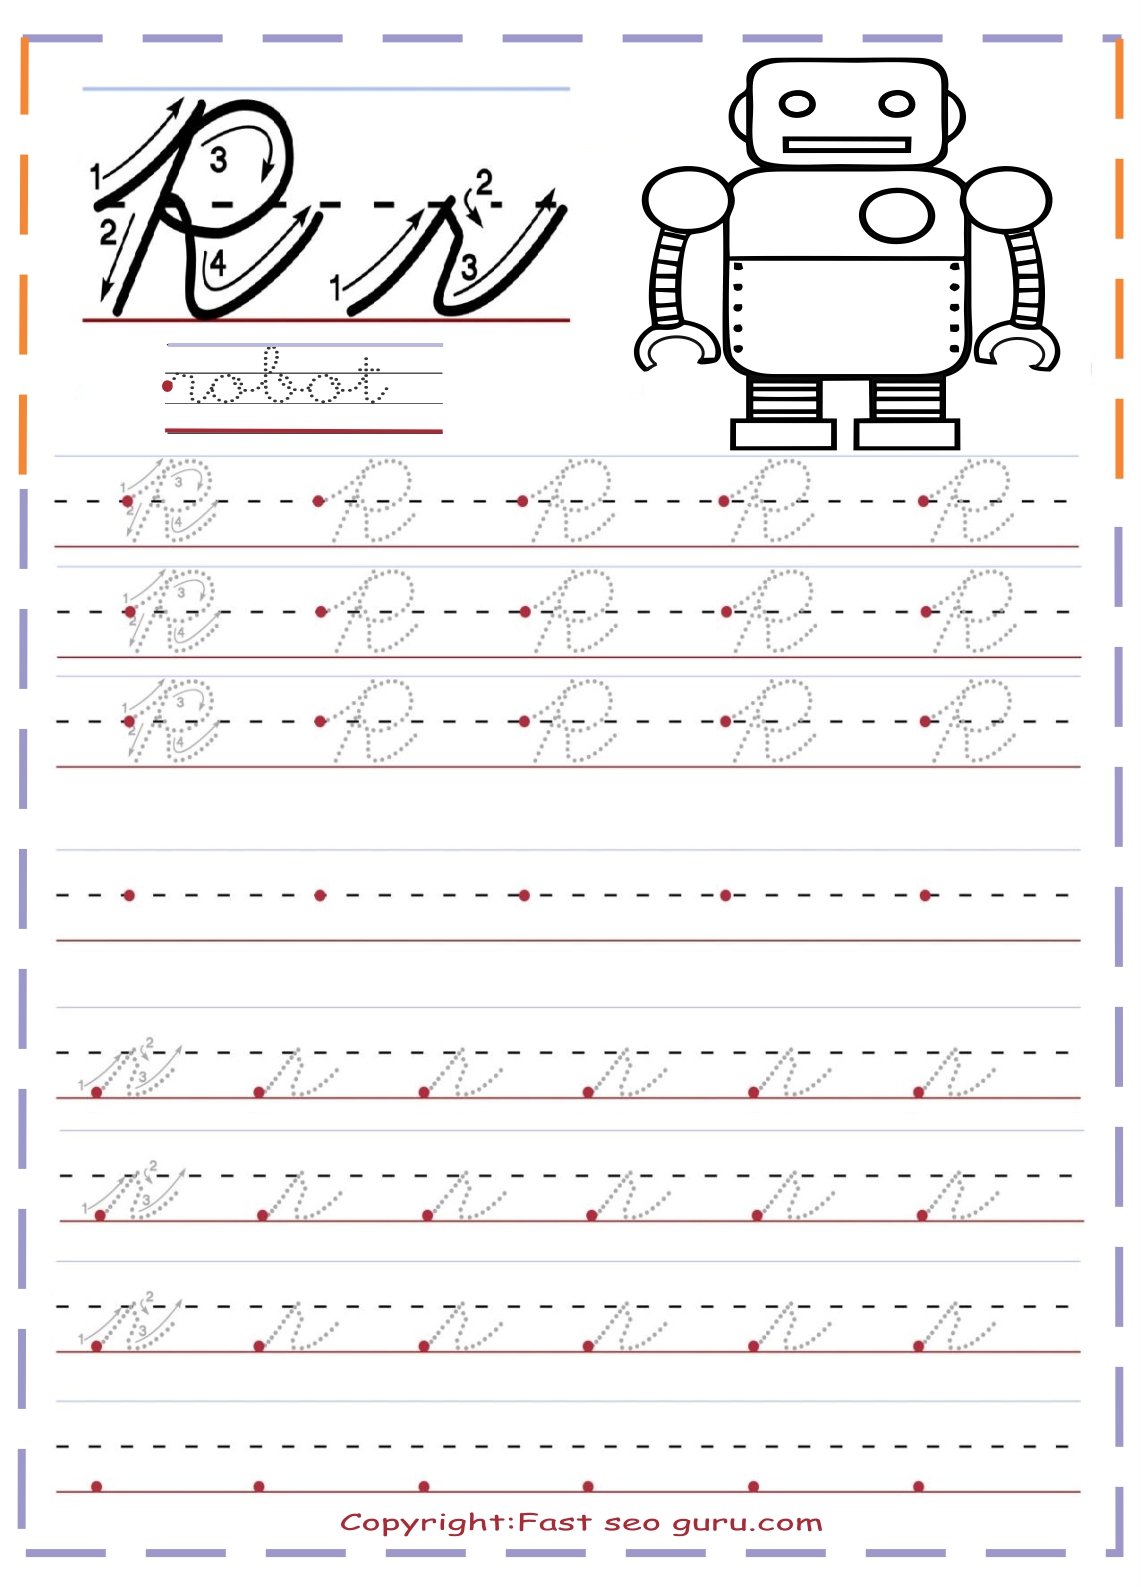 Free Kids Coloring Pages Printable